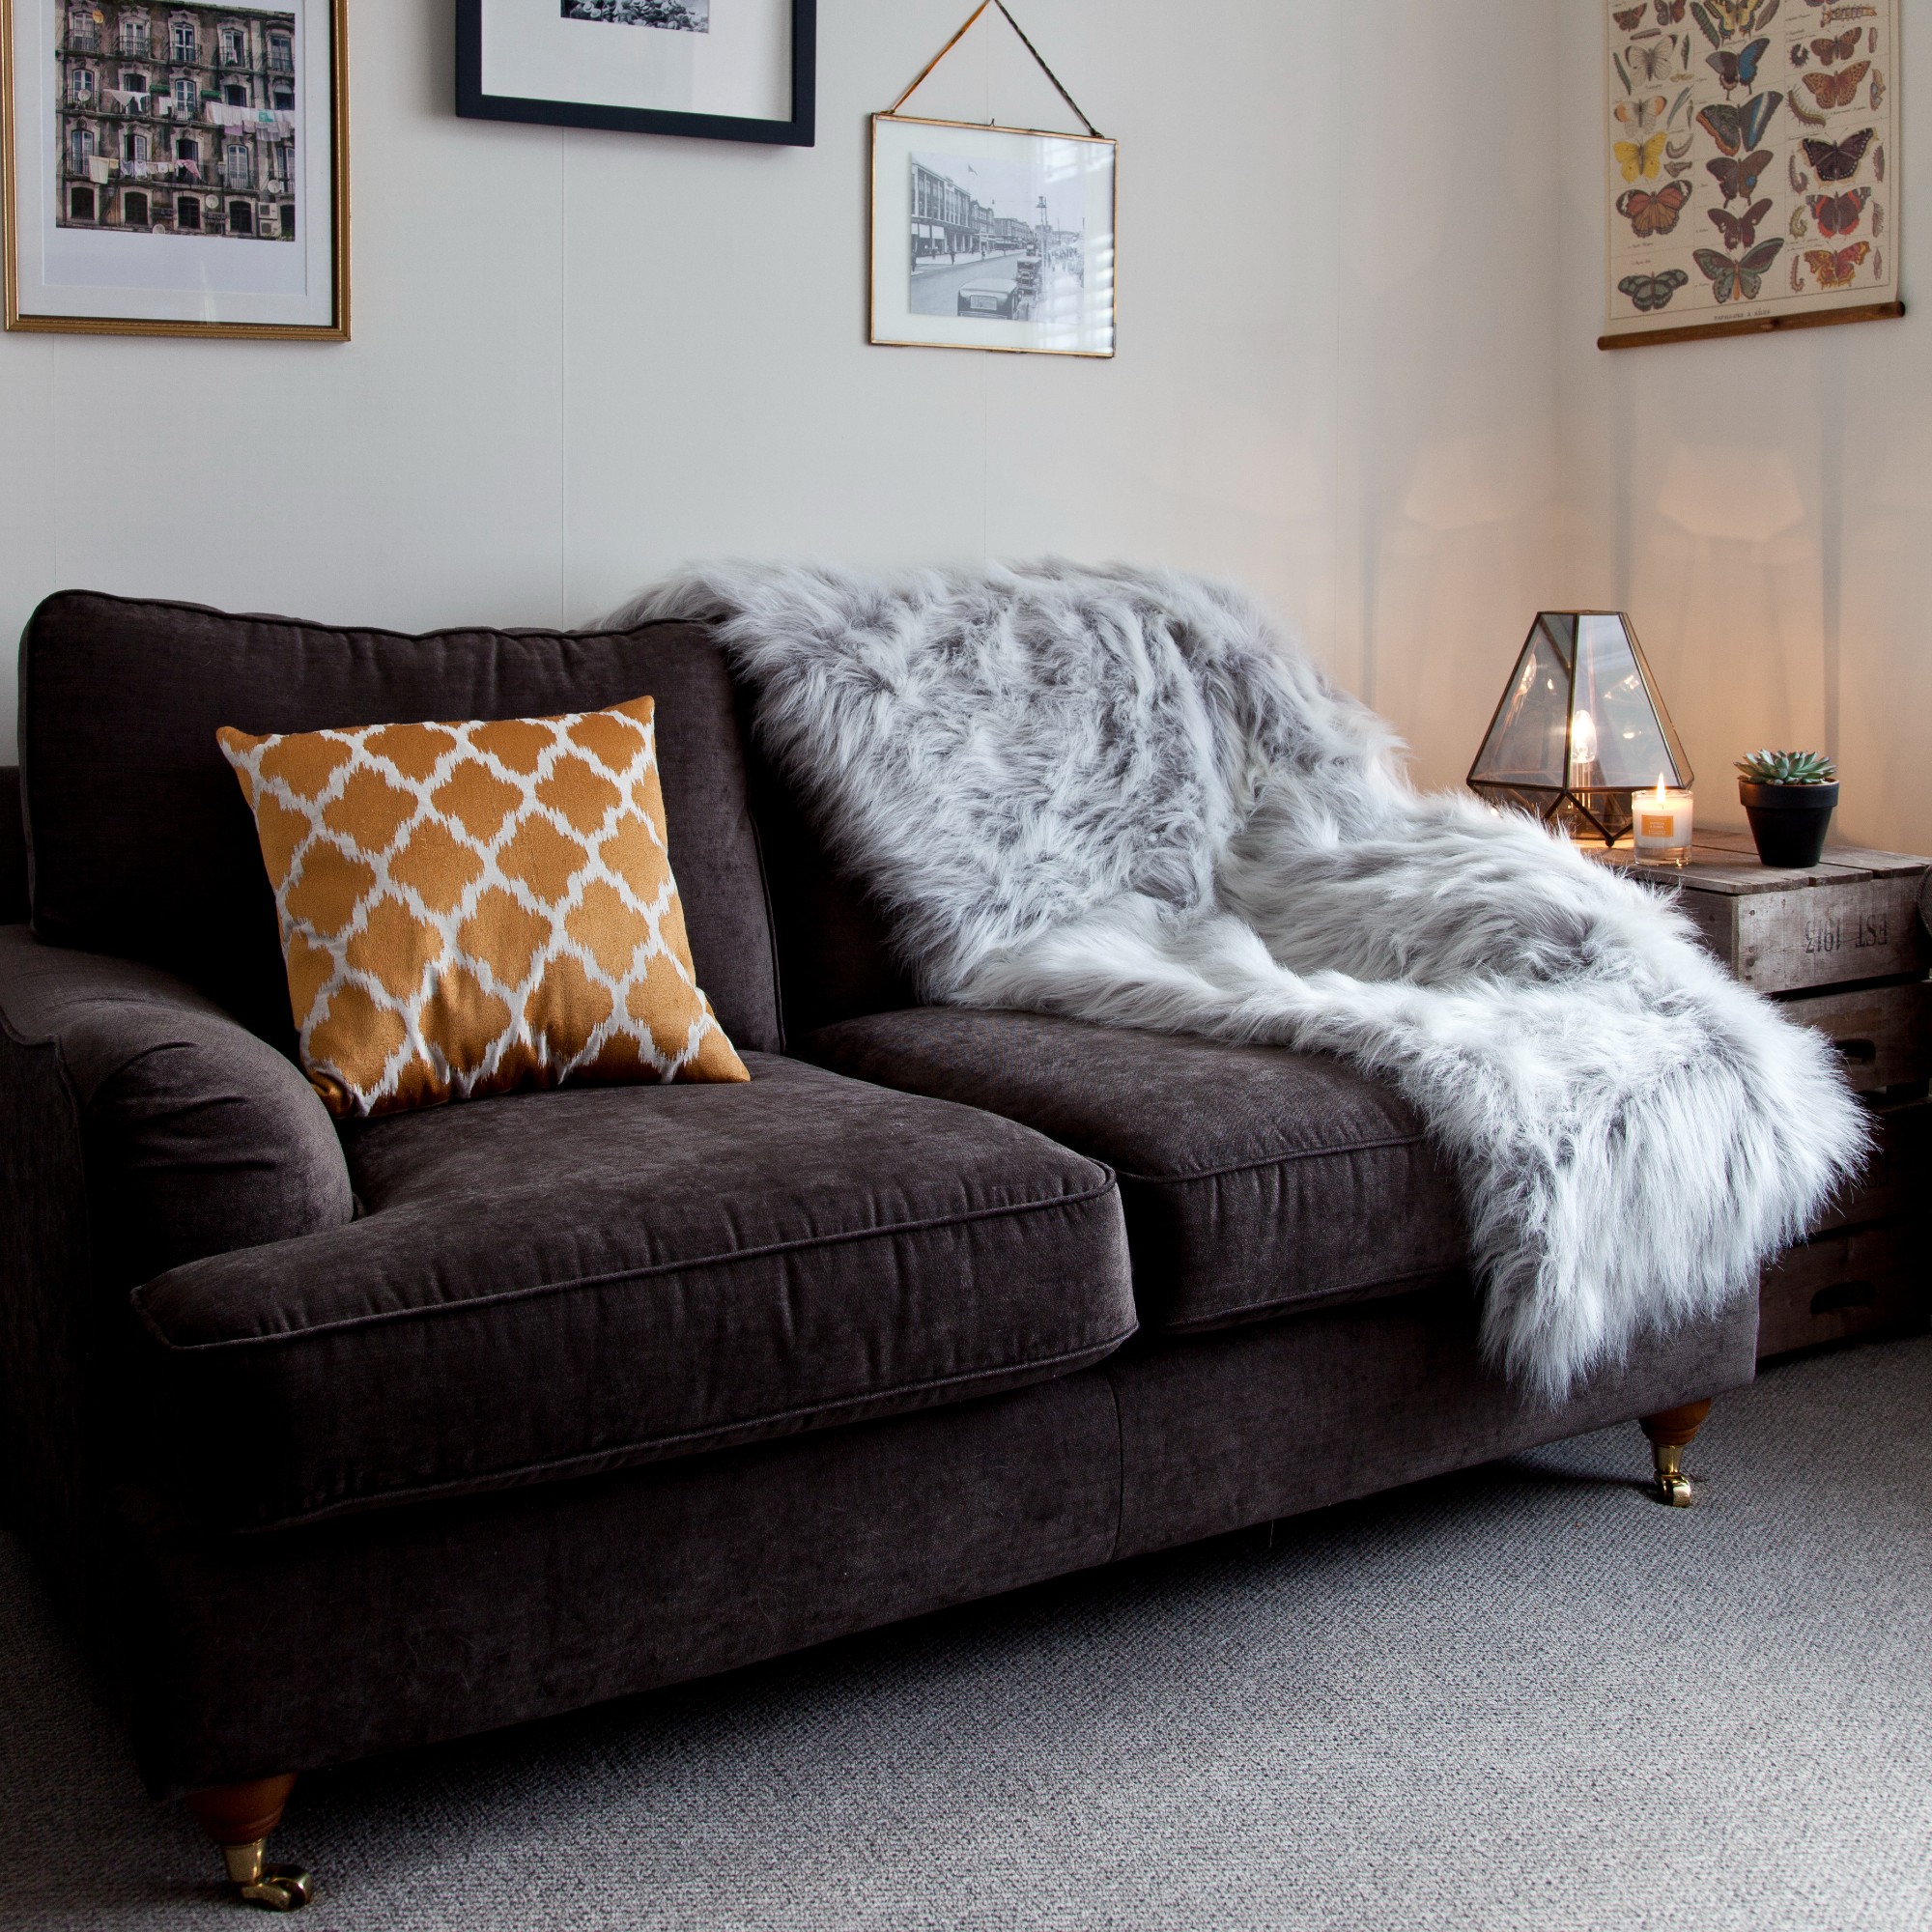 How to clean a suede sofa – the expert-approved way